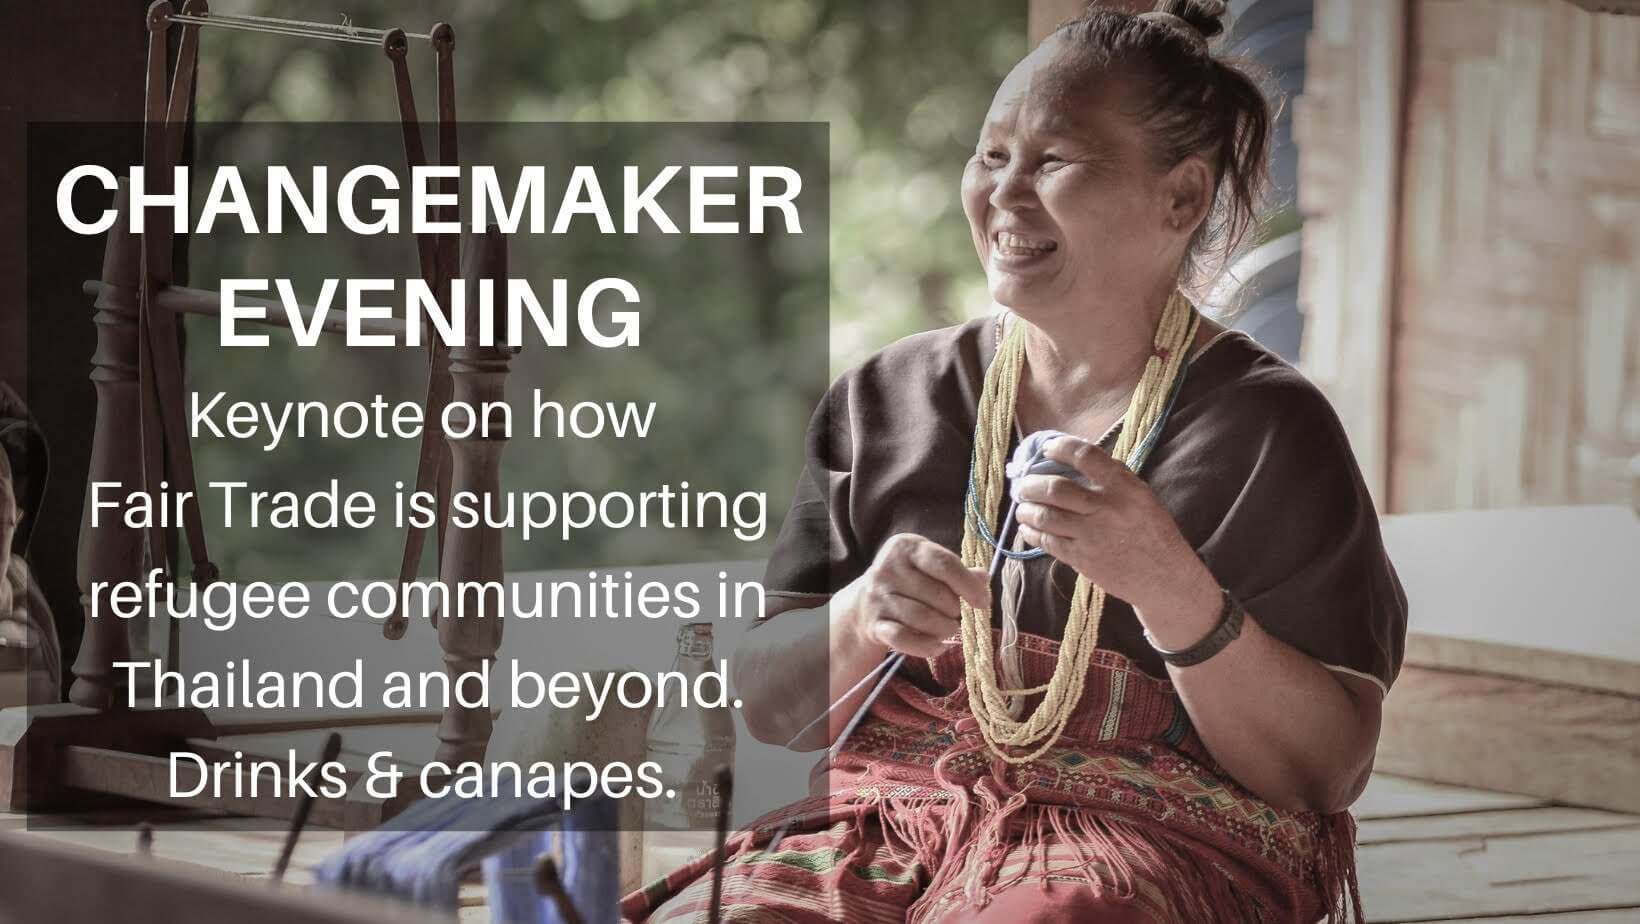 Text: Changemaker Evening Keynote on how Fair Trade is supporting refugee communities in Thailand and beyond. Drinks and canapes. Image: A smiling Thai village woman.